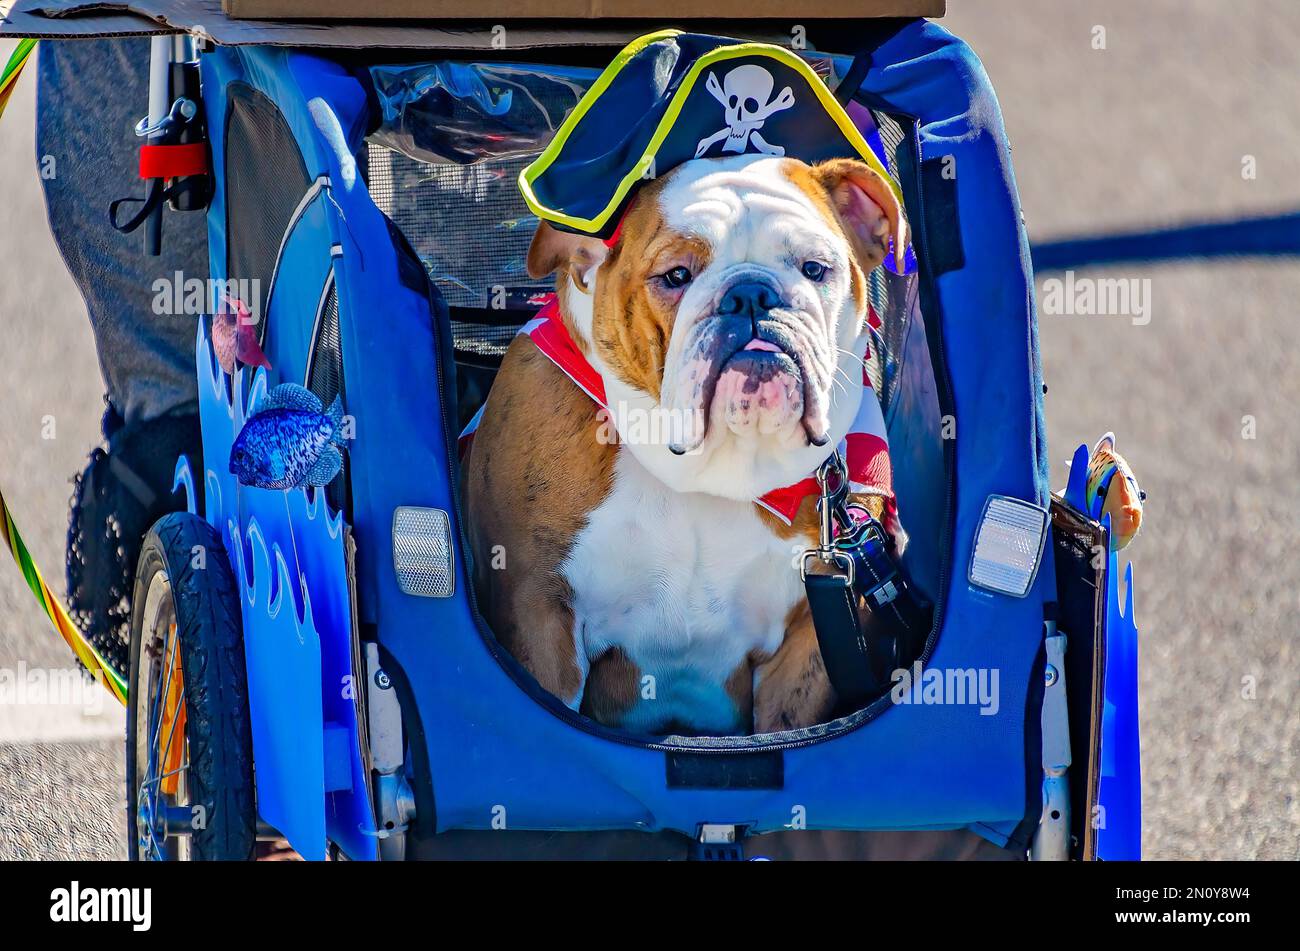 An English bulldog dressed as a pirate rides in a stroller during the Mystic Krewe of Salty Paws Mardi Gras parade in Dauphin Island, Alabama. Stock Photo